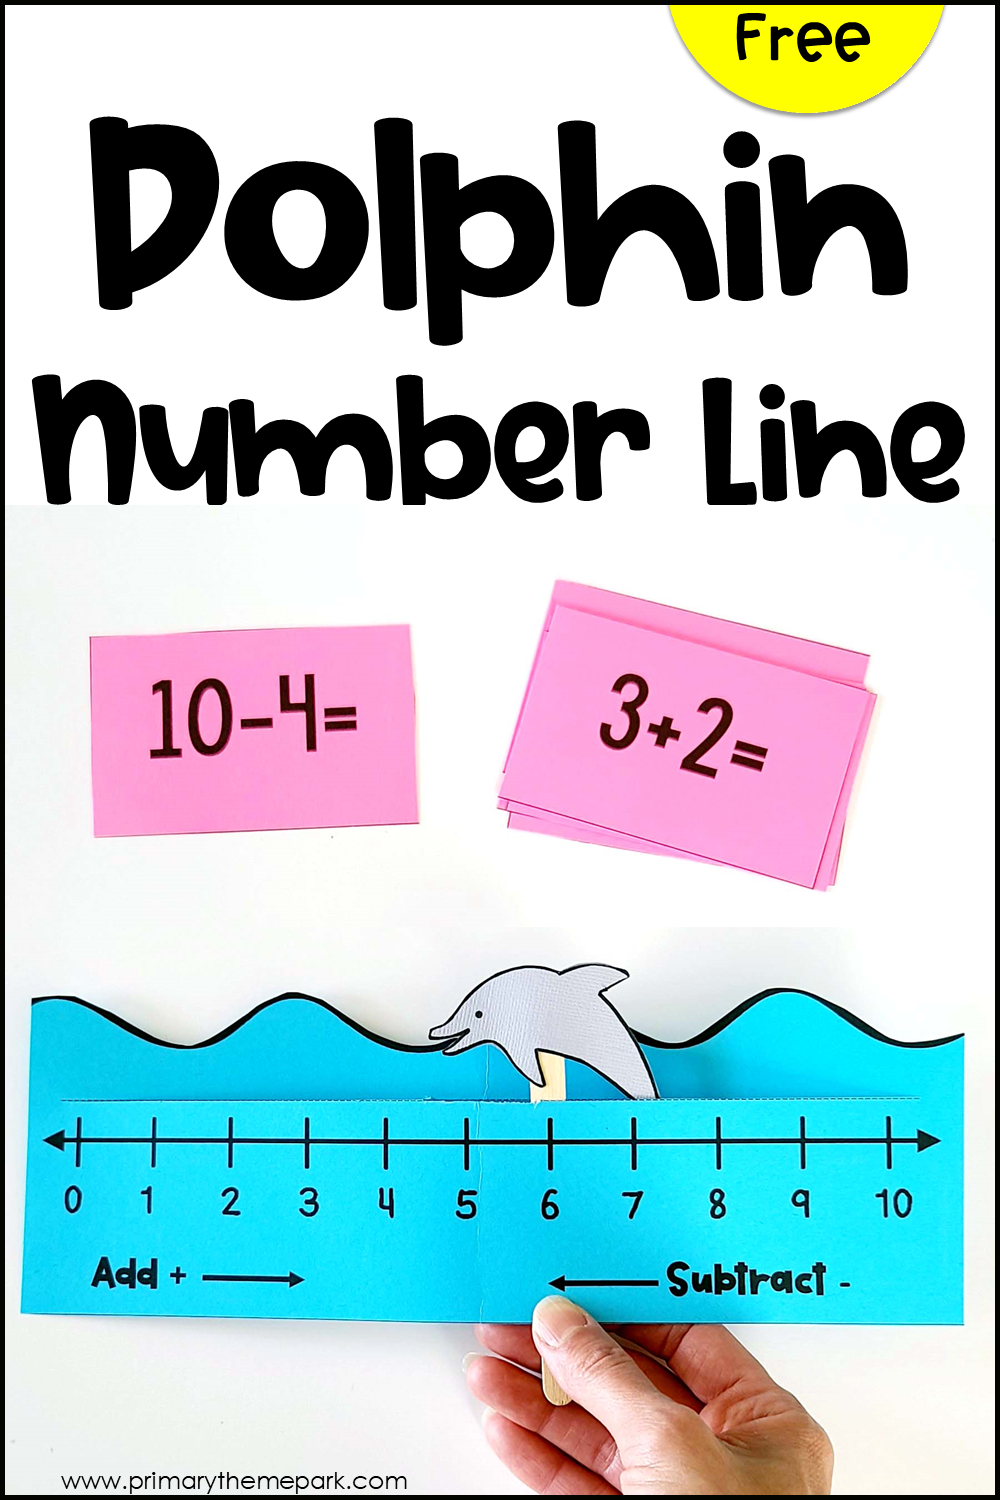 Adding and subtracting on a number line activity